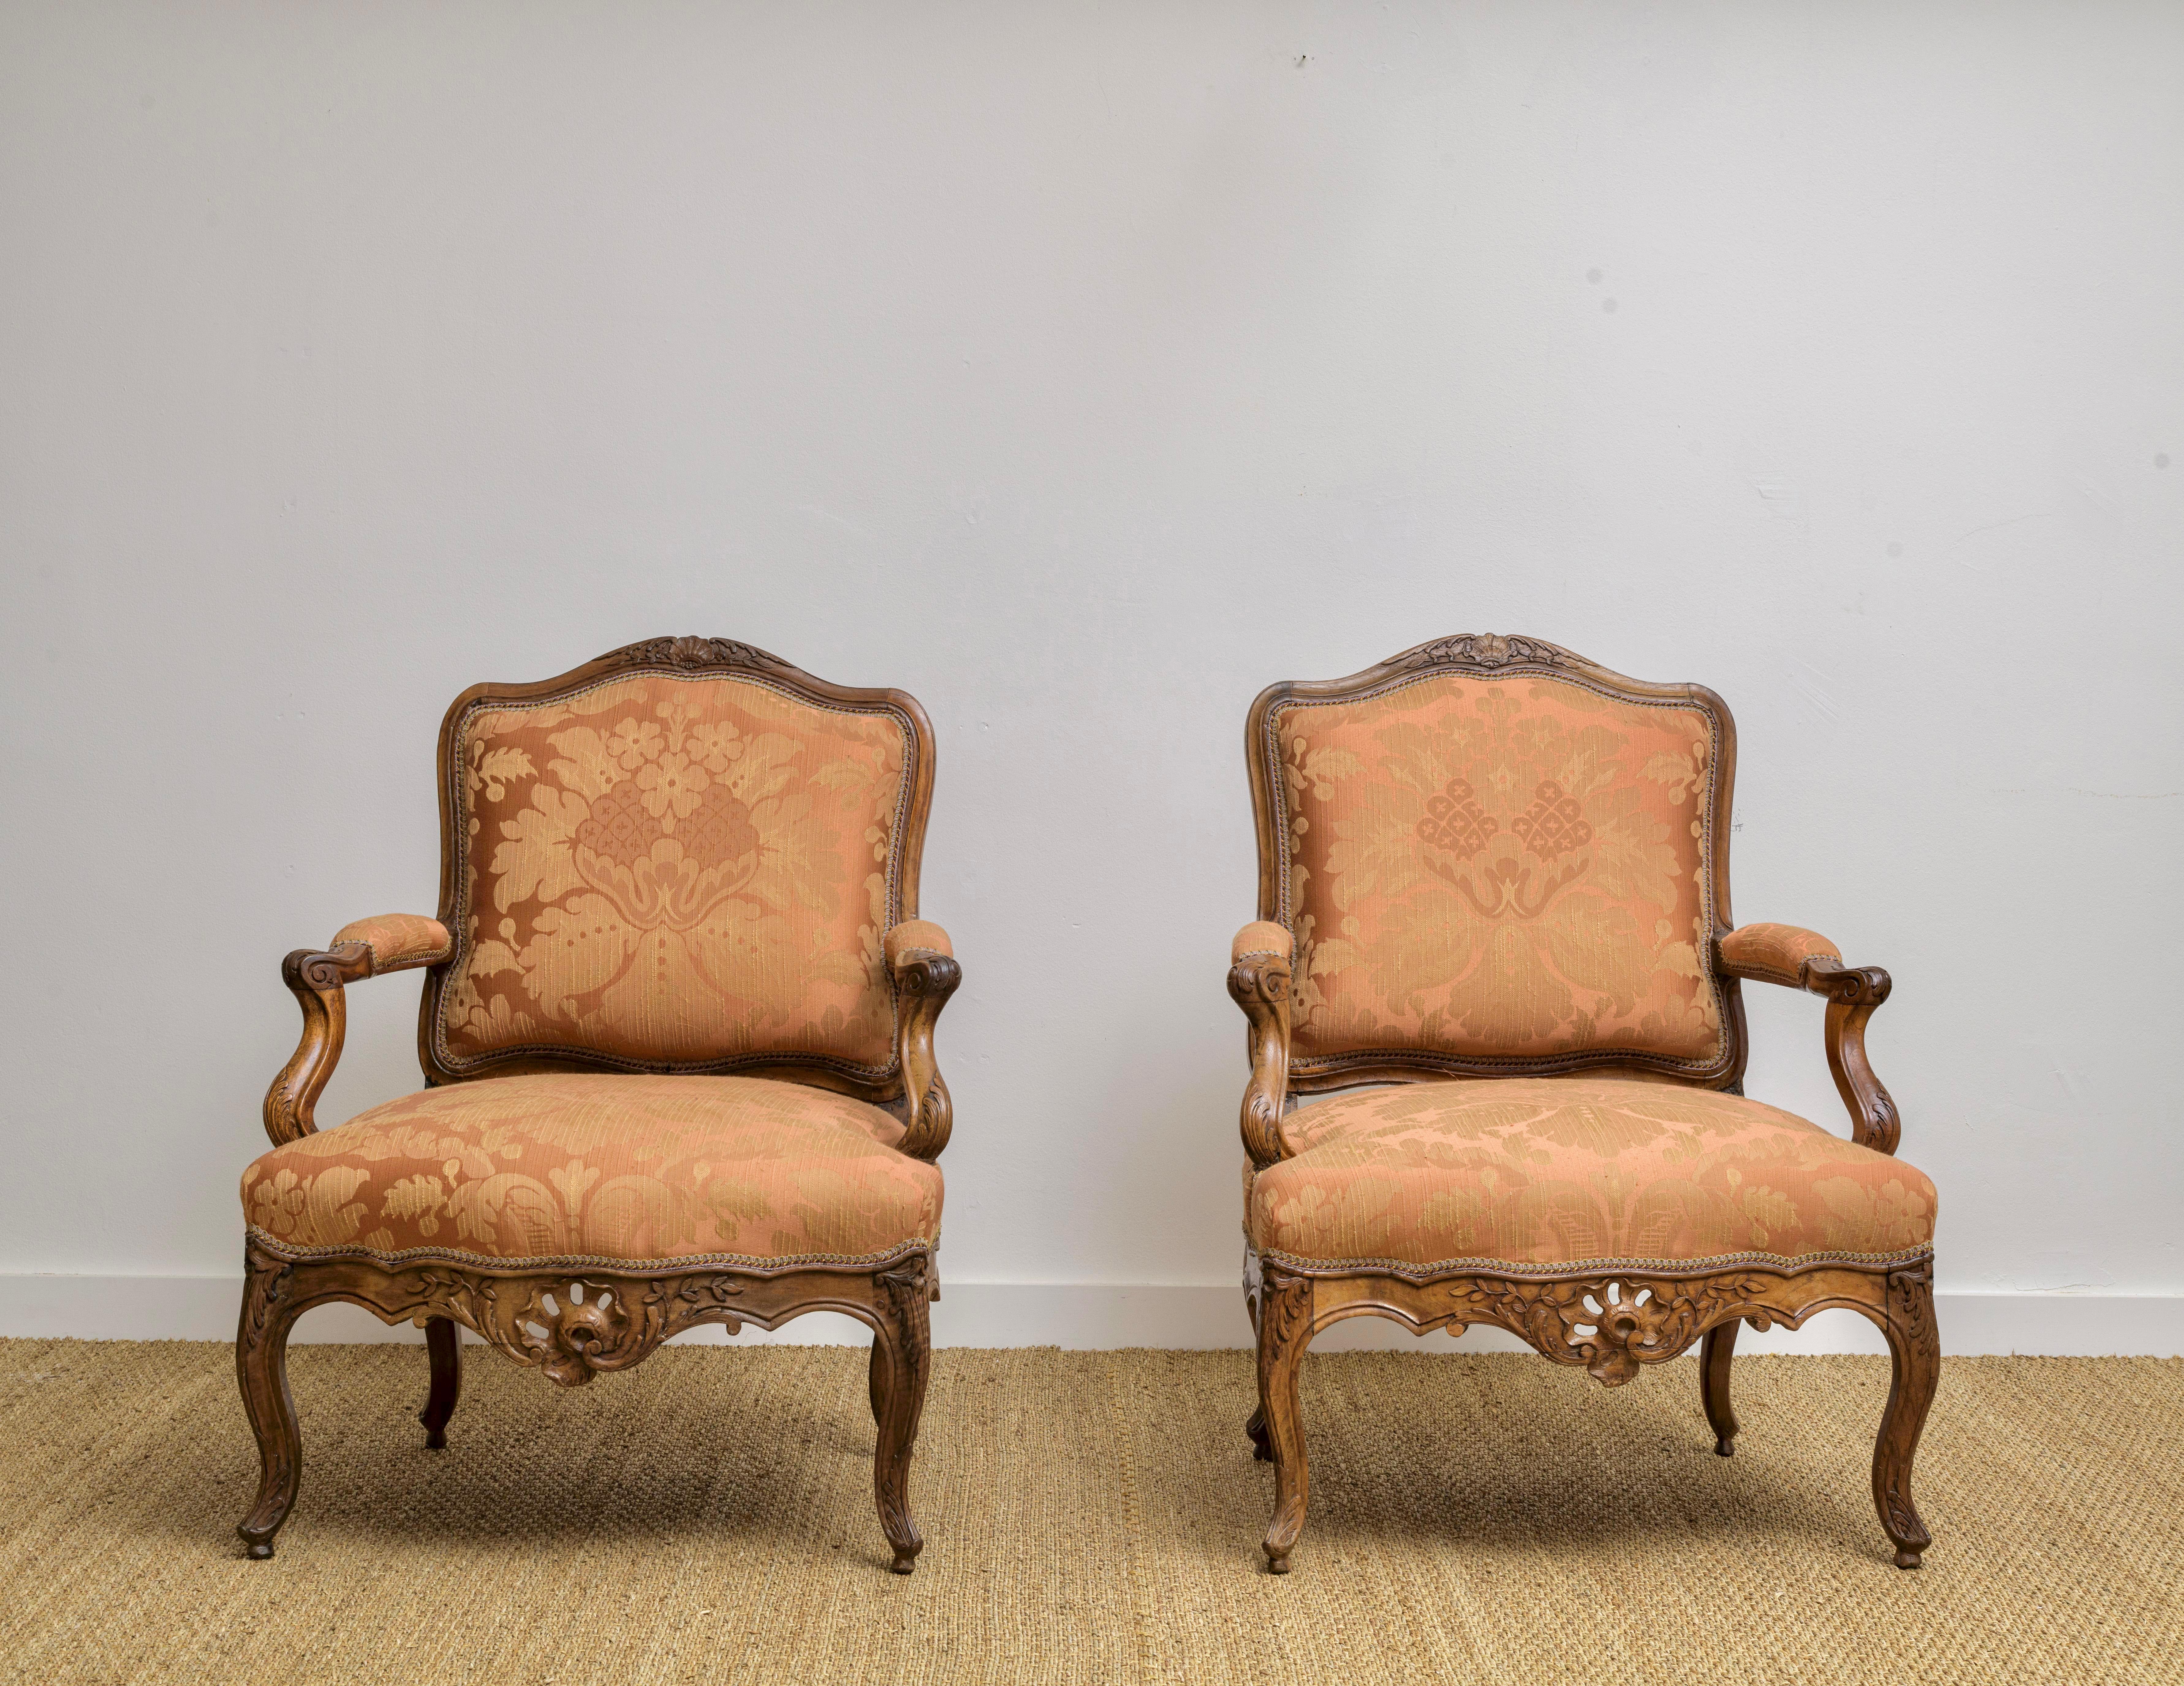 A Pair of Louis XV Carved Walnut Fauteuils a la Reine Chairs, Circa
1735.  Wonderful carving showing the rococo influence of the time.  Carving is a fine example showing great detail and the open fretwork on the apron.  Beautiful patina,  Recently